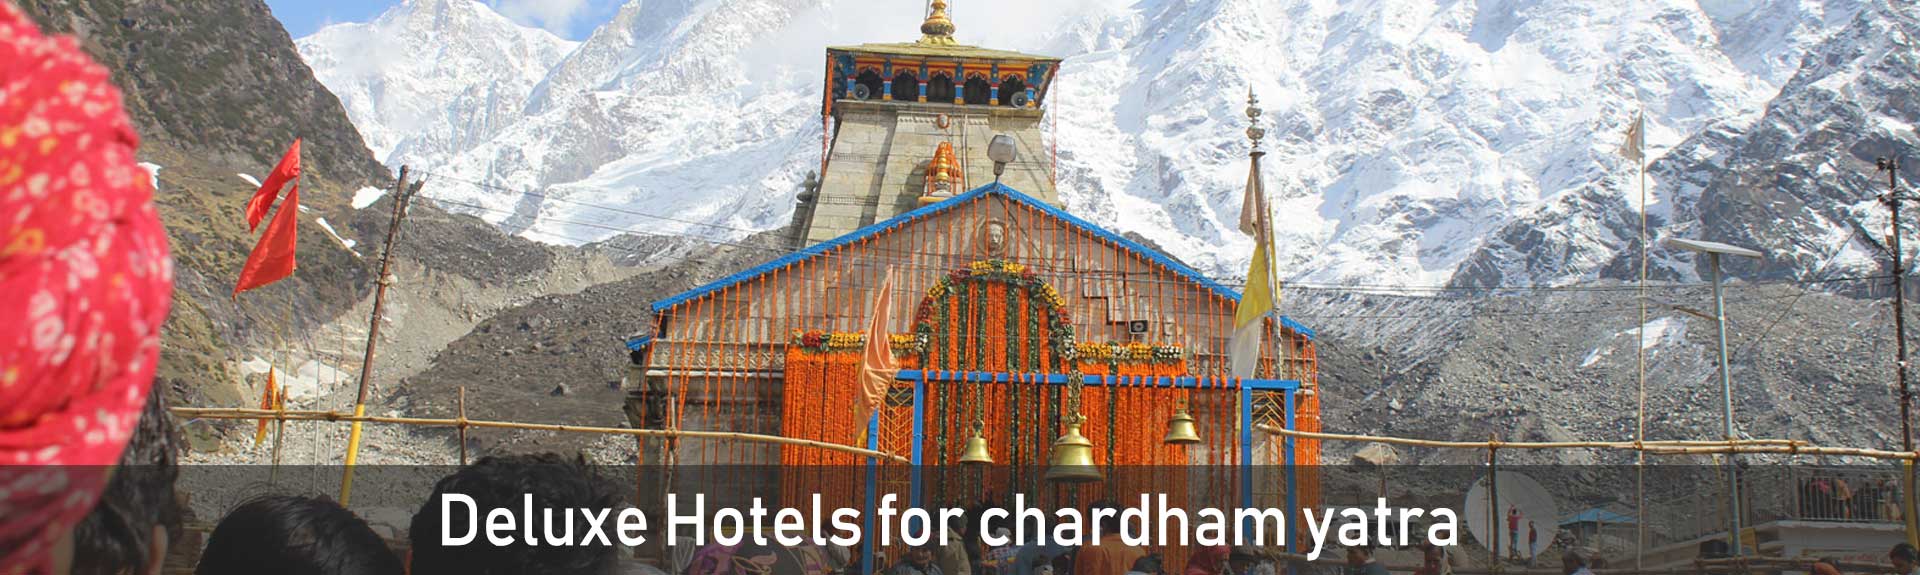 Deluxe Hotels for chardham yatra